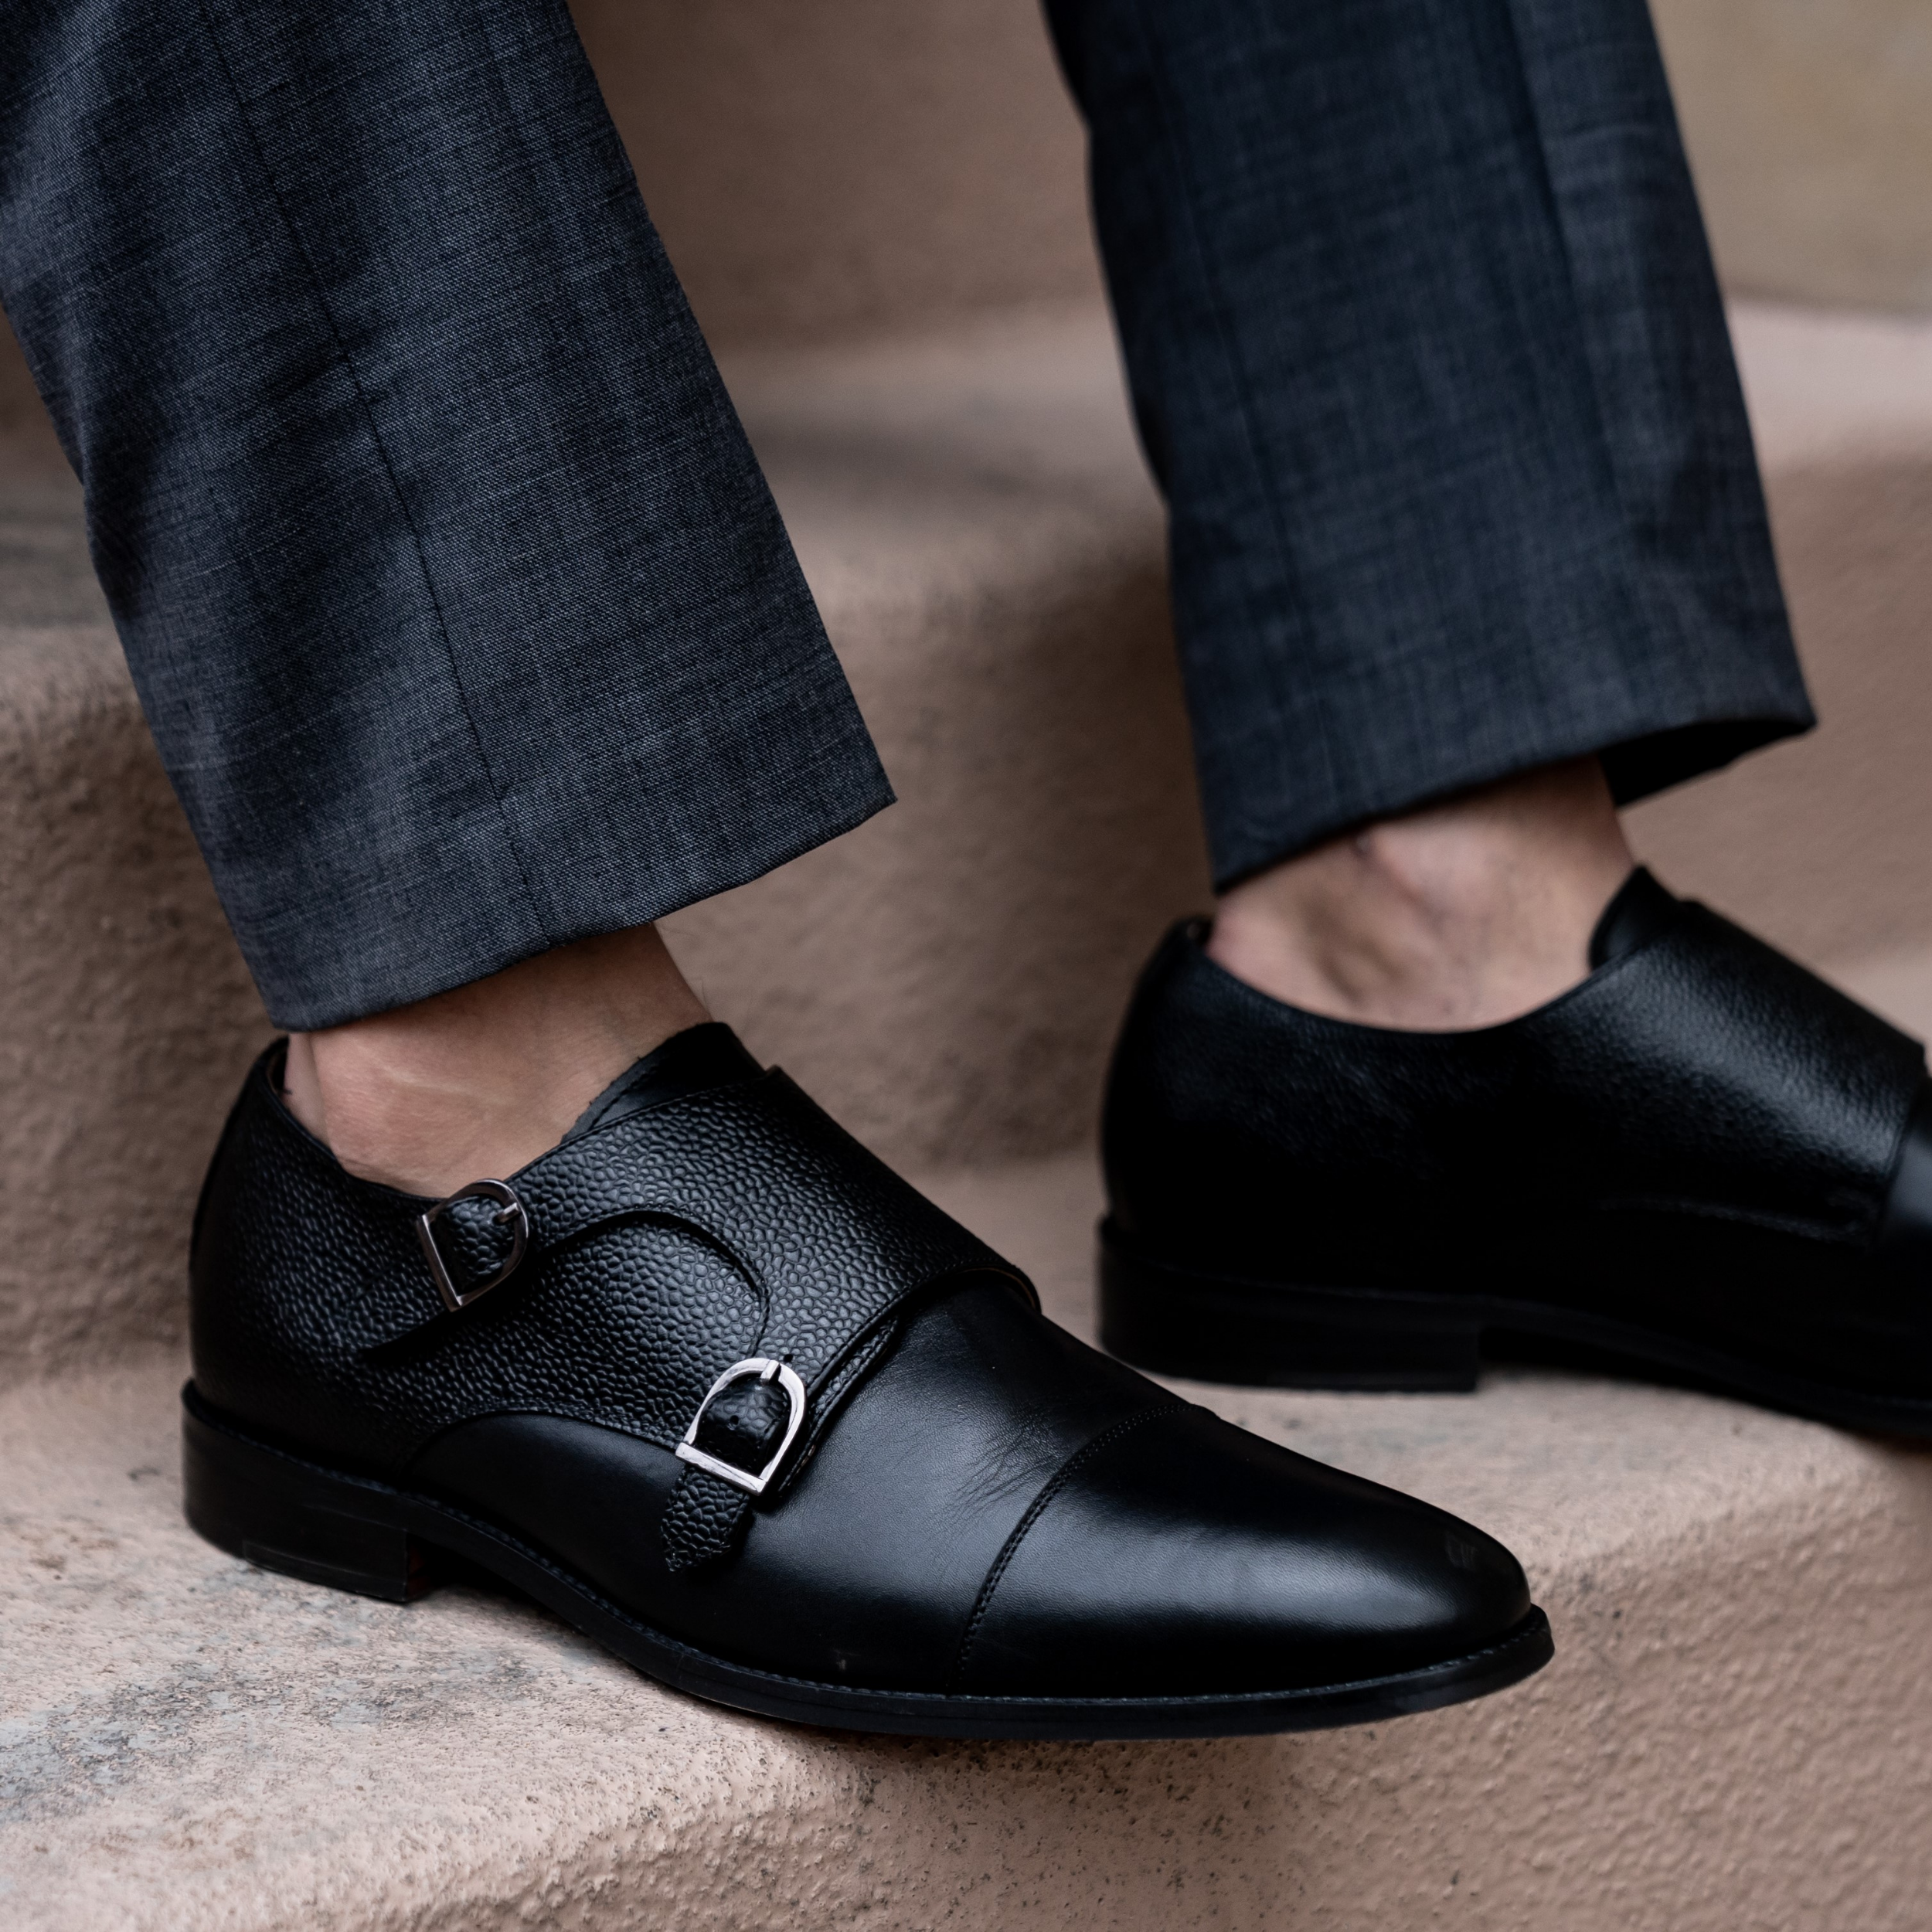 Monk strap shoes | Your guide To Monk Strap Shoe | Coveti